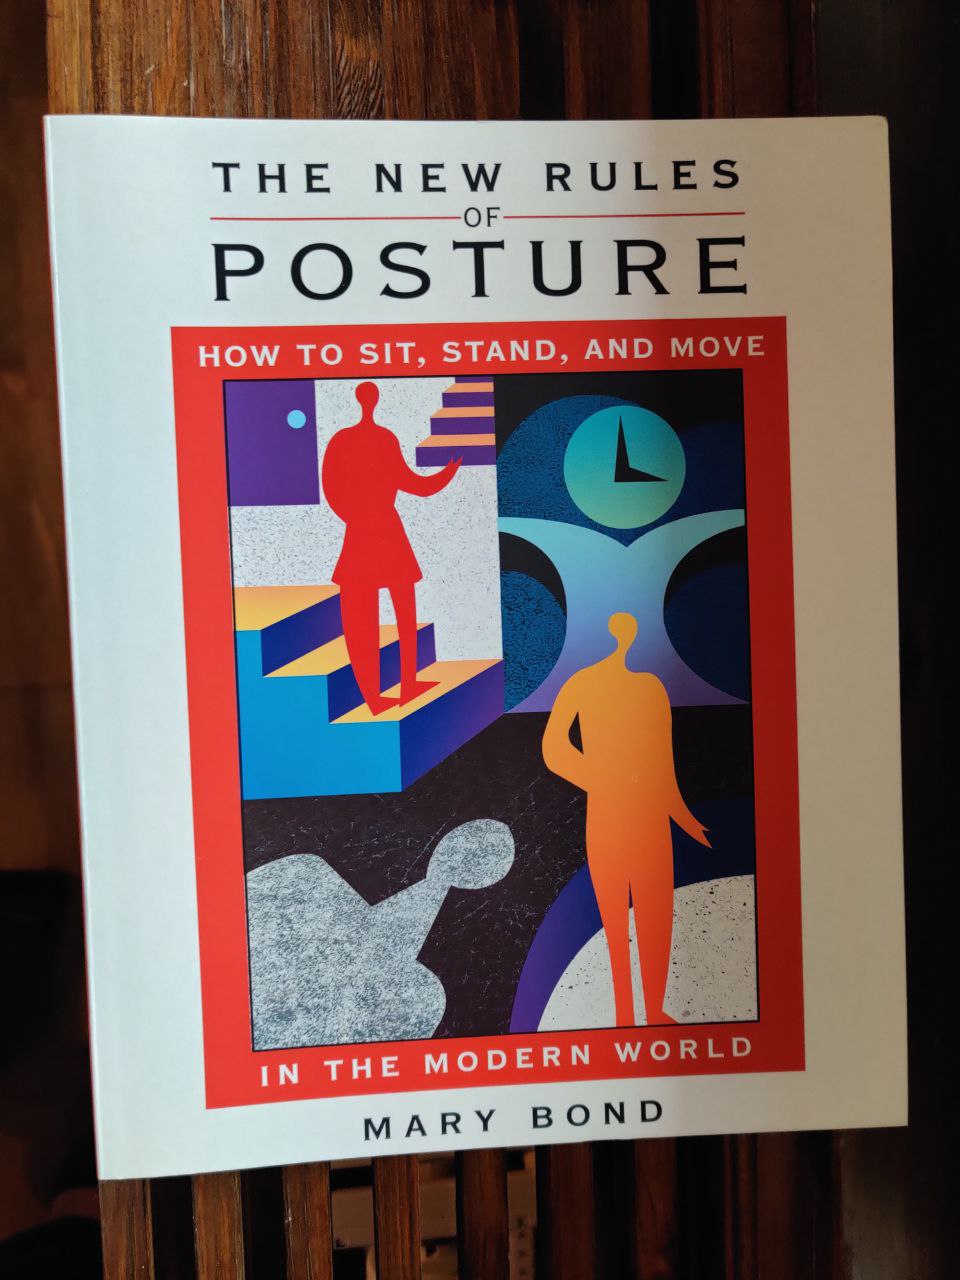 “The New Rules of Posture” cover